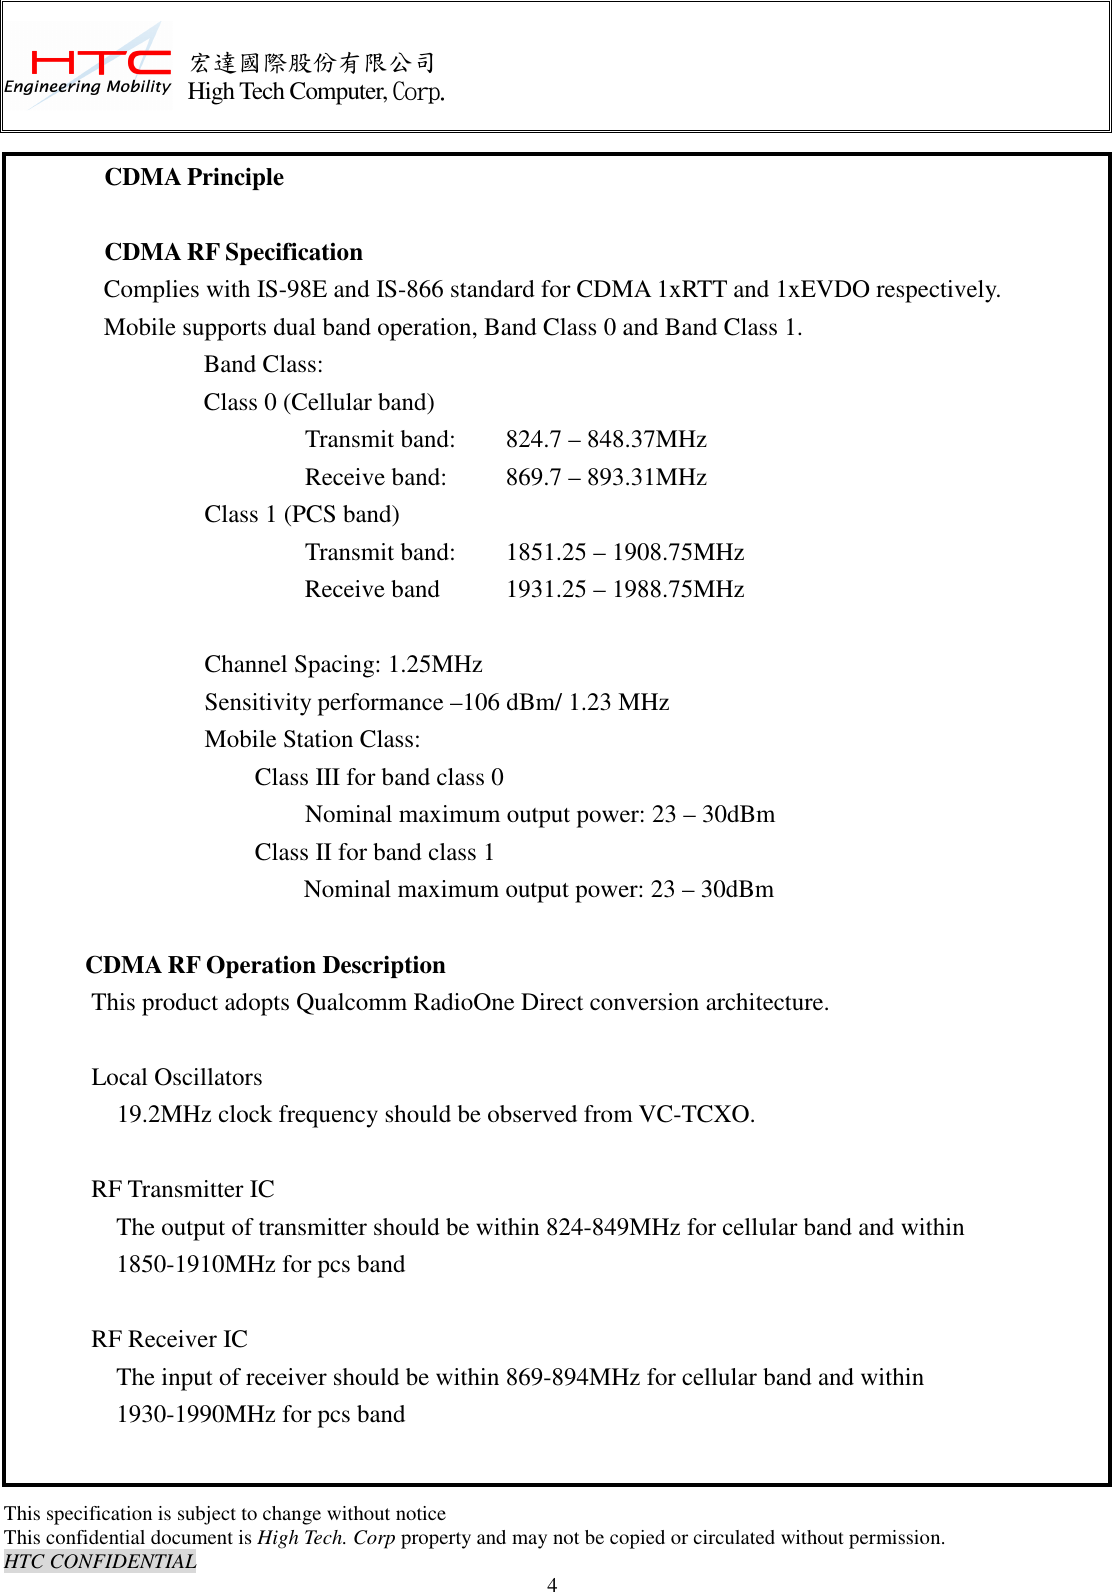      This specification is subject to change without notice This confidential document is High Tech. Corp property and may not be copied or circulated without permission. HTC CONFIDENTIAL                                    4 宏達國際股份有限公司 High Tech Computer, Corp. CDMA Principle      CDMA RF Specification Complies with IS-98E and IS-866 standard for CDMA 1xRTT and 1xEVDO respectively. Mobile supports dual band operation, Band Class 0 and Band Class 1.   Band Class: Class 0 (Cellular band)             Transmit band:    824.7 – 848.37MHz             Receive band:    869.7 – 893.31MHz         Class 1 (PCS band)             Transmit band:    1851.25 – 1908.75MHz                   Receive band    1931.25 – 1988.75MHz              Channel Spacing: 1.25MHz               Sensitivity performance –106 dBm/ 1.23 MHz Mobile Station Class: Class III for band class 0             Nominal maximum output power: 23 – 30dBm           Class II for band class 1   Nominal maximum output power: 23 – 30dBm      CDMA RF Operation Description               This product adopts Qualcomm RadioOne Direct conversion architecture.                          Local Oscillators   19.2MHz clock frequency should be observed from VC-TCXO.                  RF Transmitter IC                     The output of transmitter should be within 824-849MHz for cellular band and within                           1850-1910MHz for pcs band                RF Receiver IC                     The input of receiver should be within 869-894MHz for cellular band and within                           1930-1990MHz for pcs band 